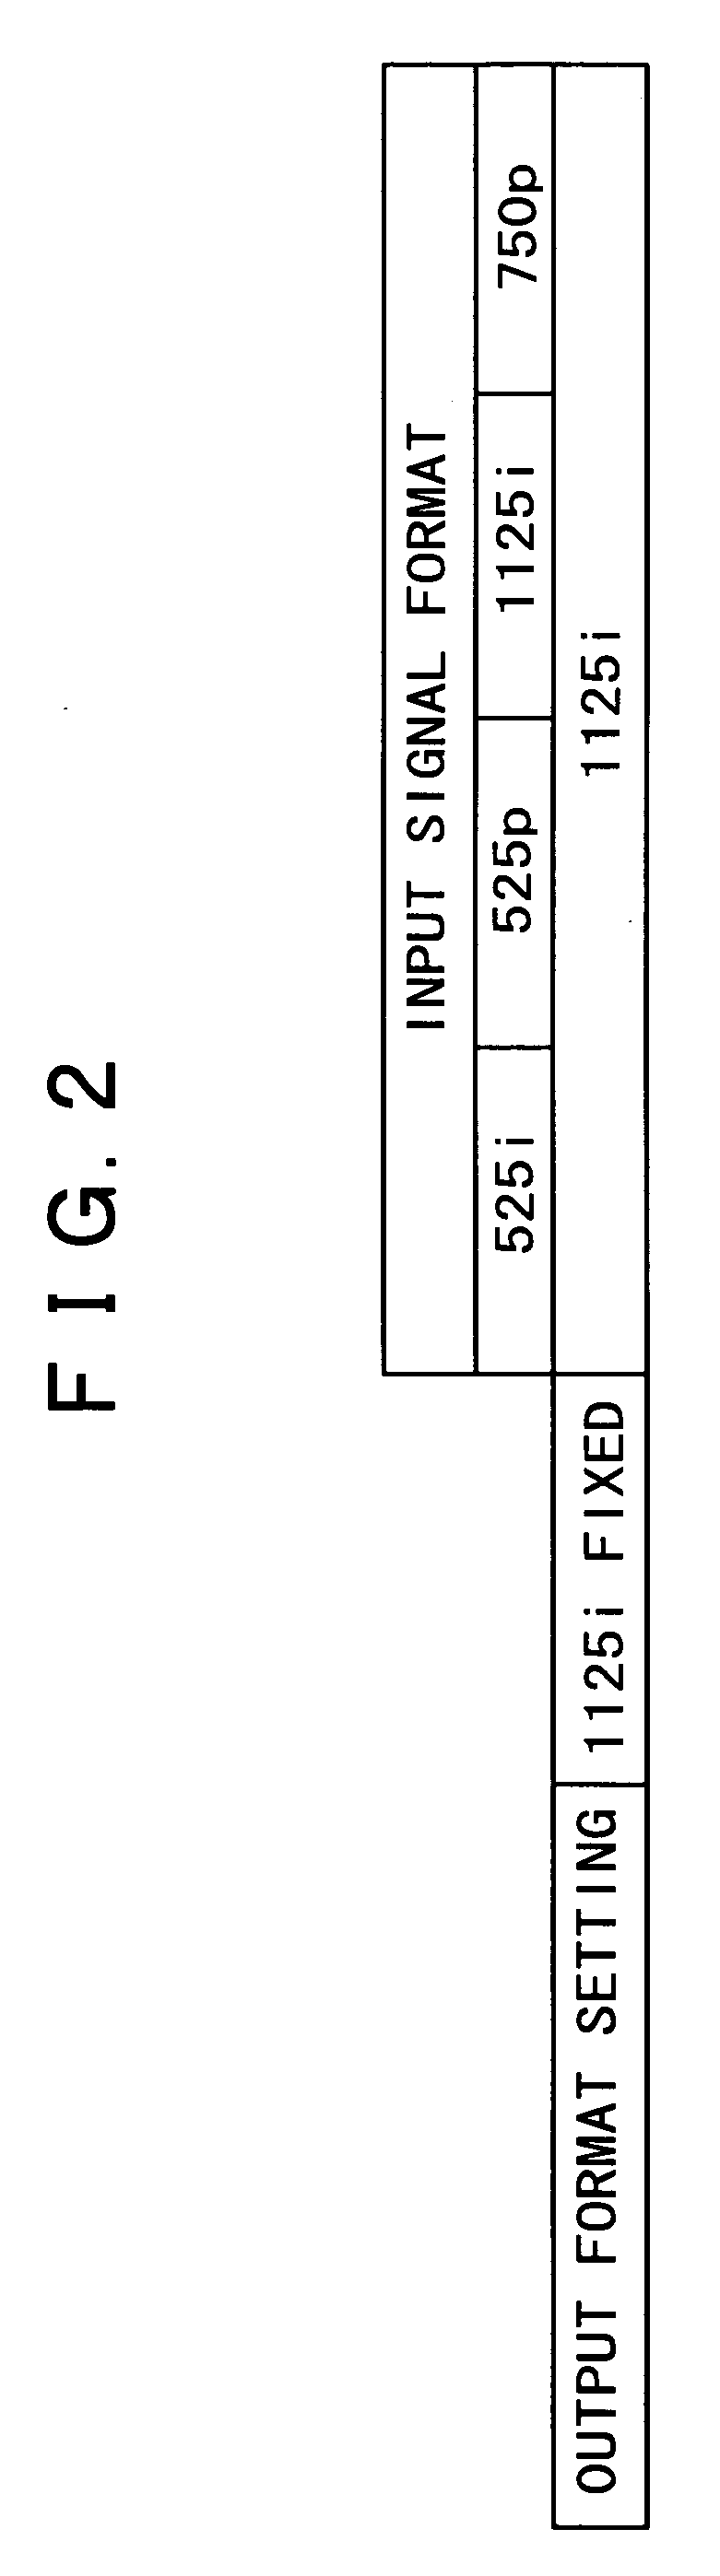 Video signal processing apparatus and method